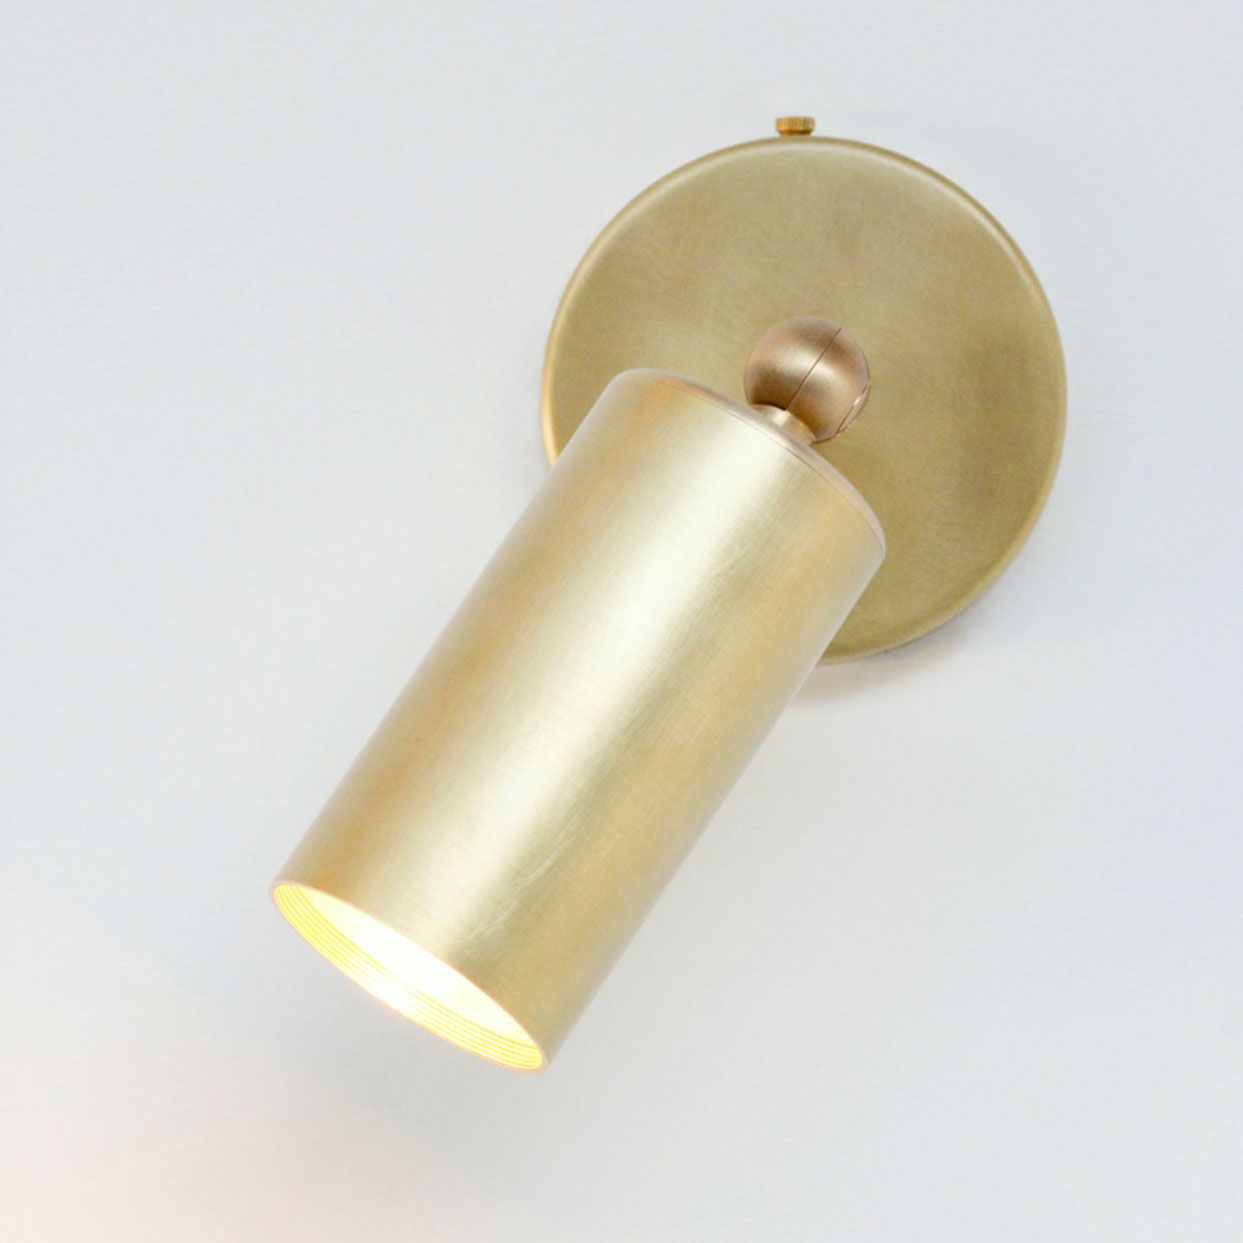 The VIDERE luxury wall Light is handmade in the UK and supplied by South Charlotte Fine Lighting in Edinburgh, Scotland.